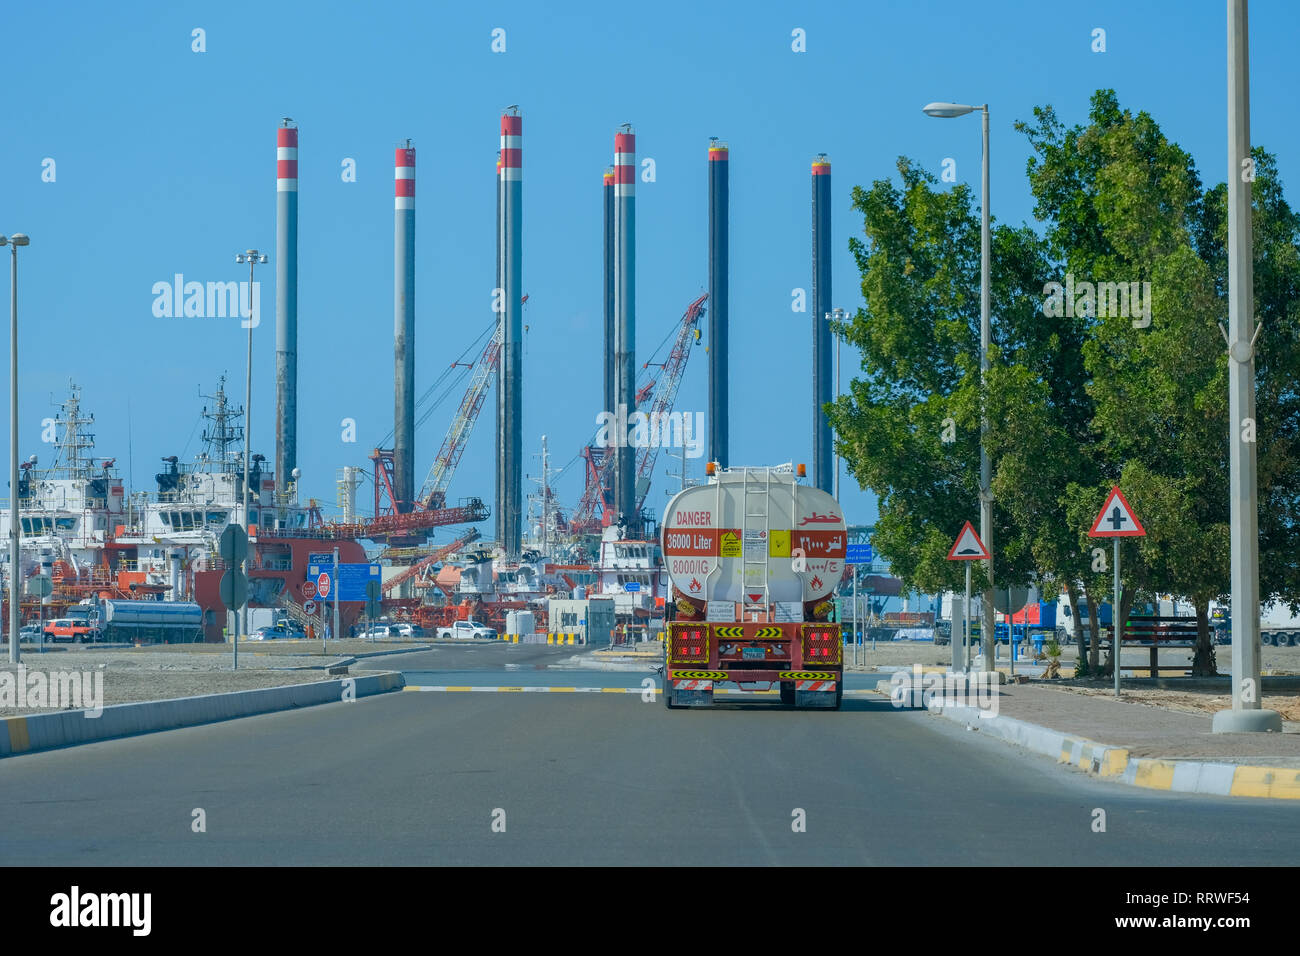 Oil Tanker near Zayed Port against oil rigs and cargo ships Stock Photo